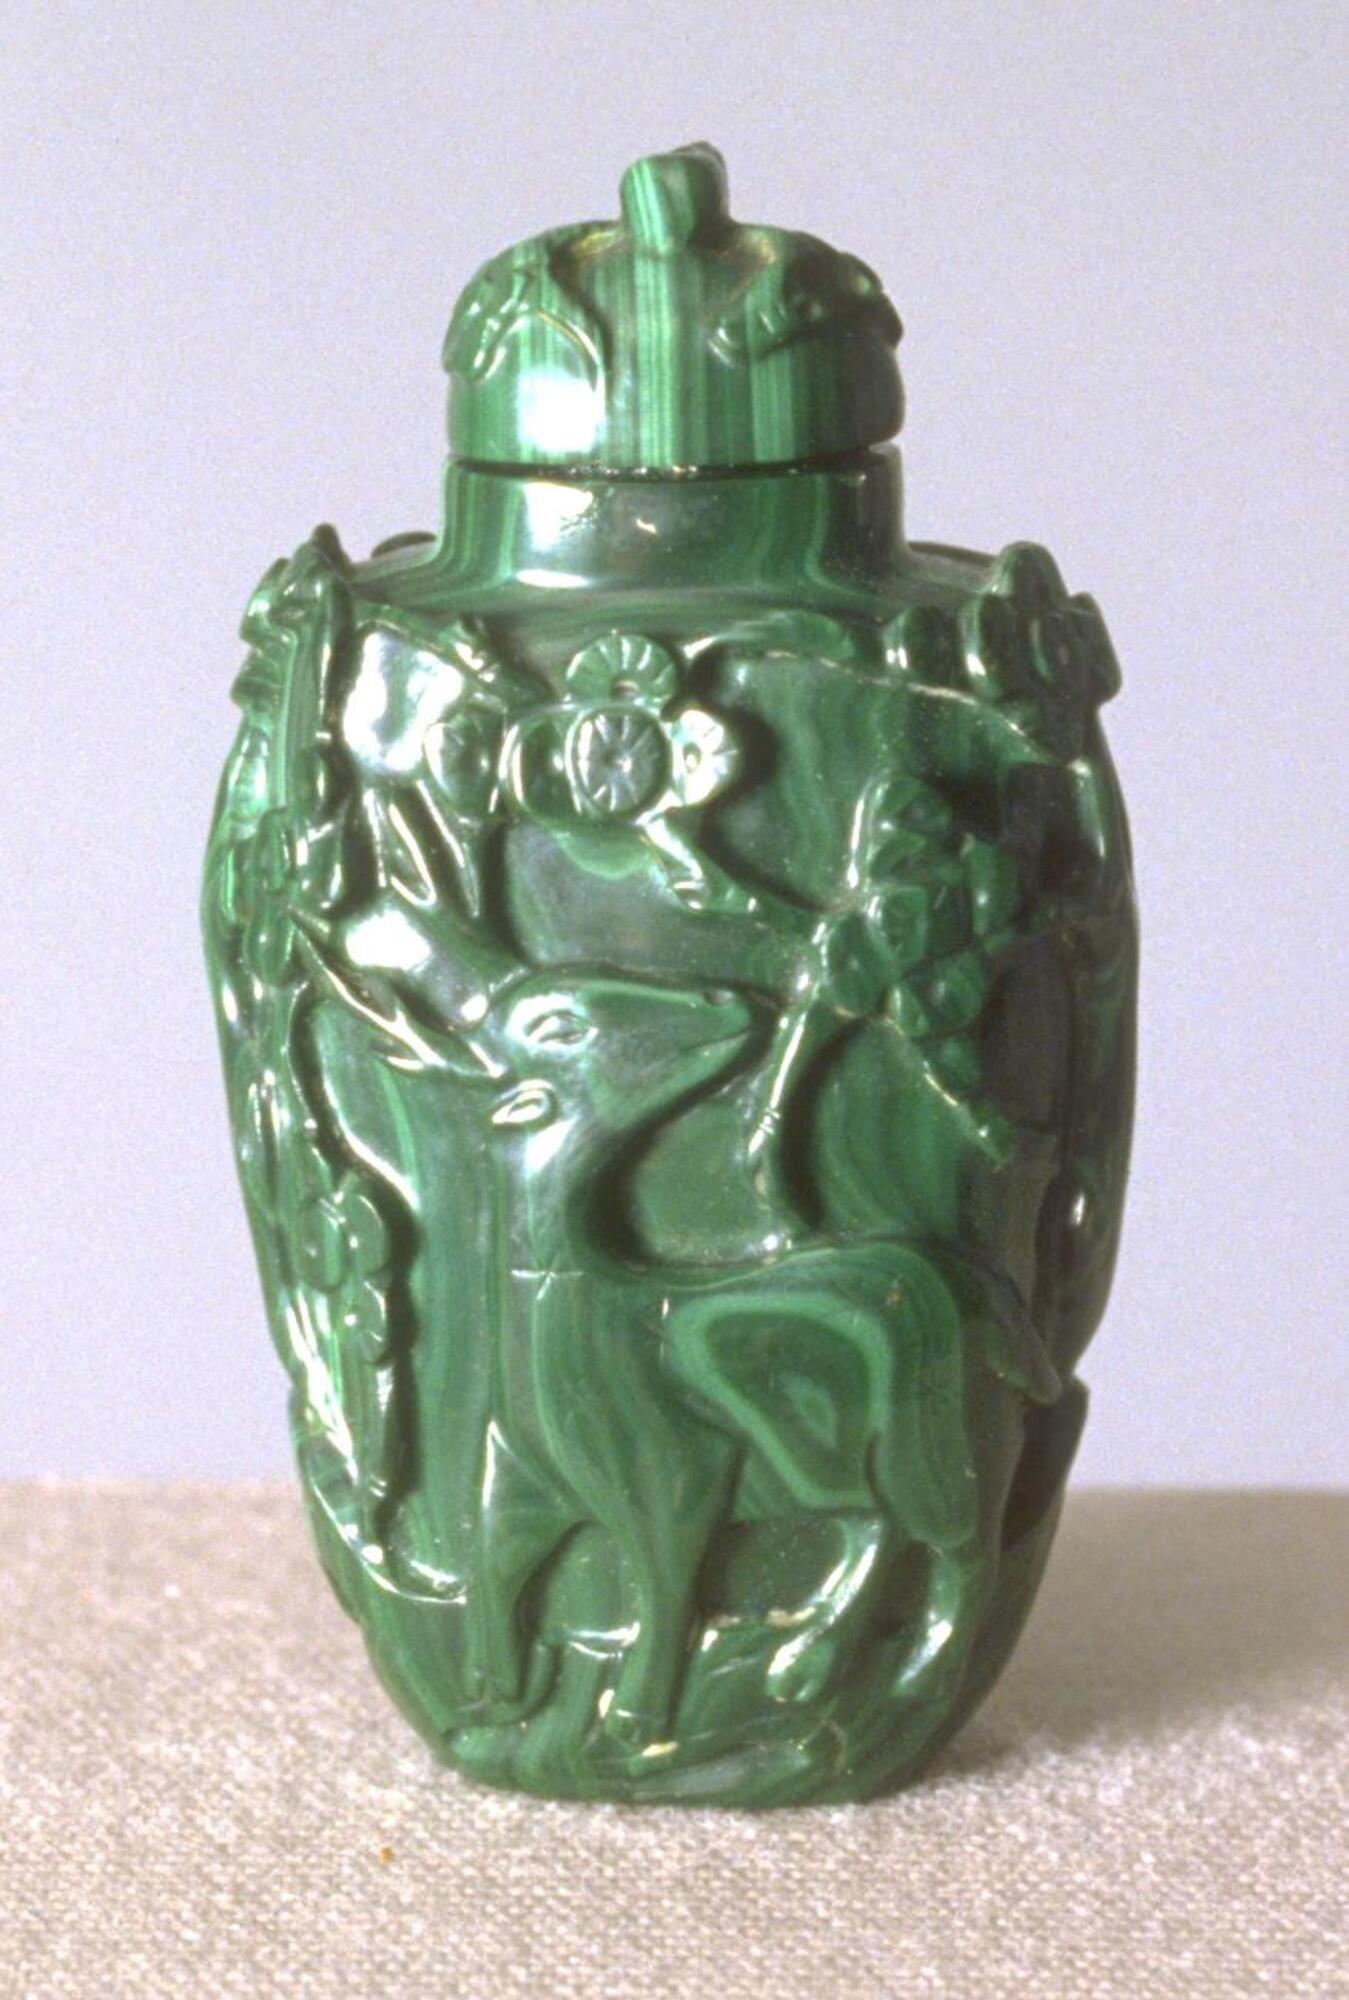 A malachite snuff bottle with carvings of deer and trees. On the top is a malachite stopper.